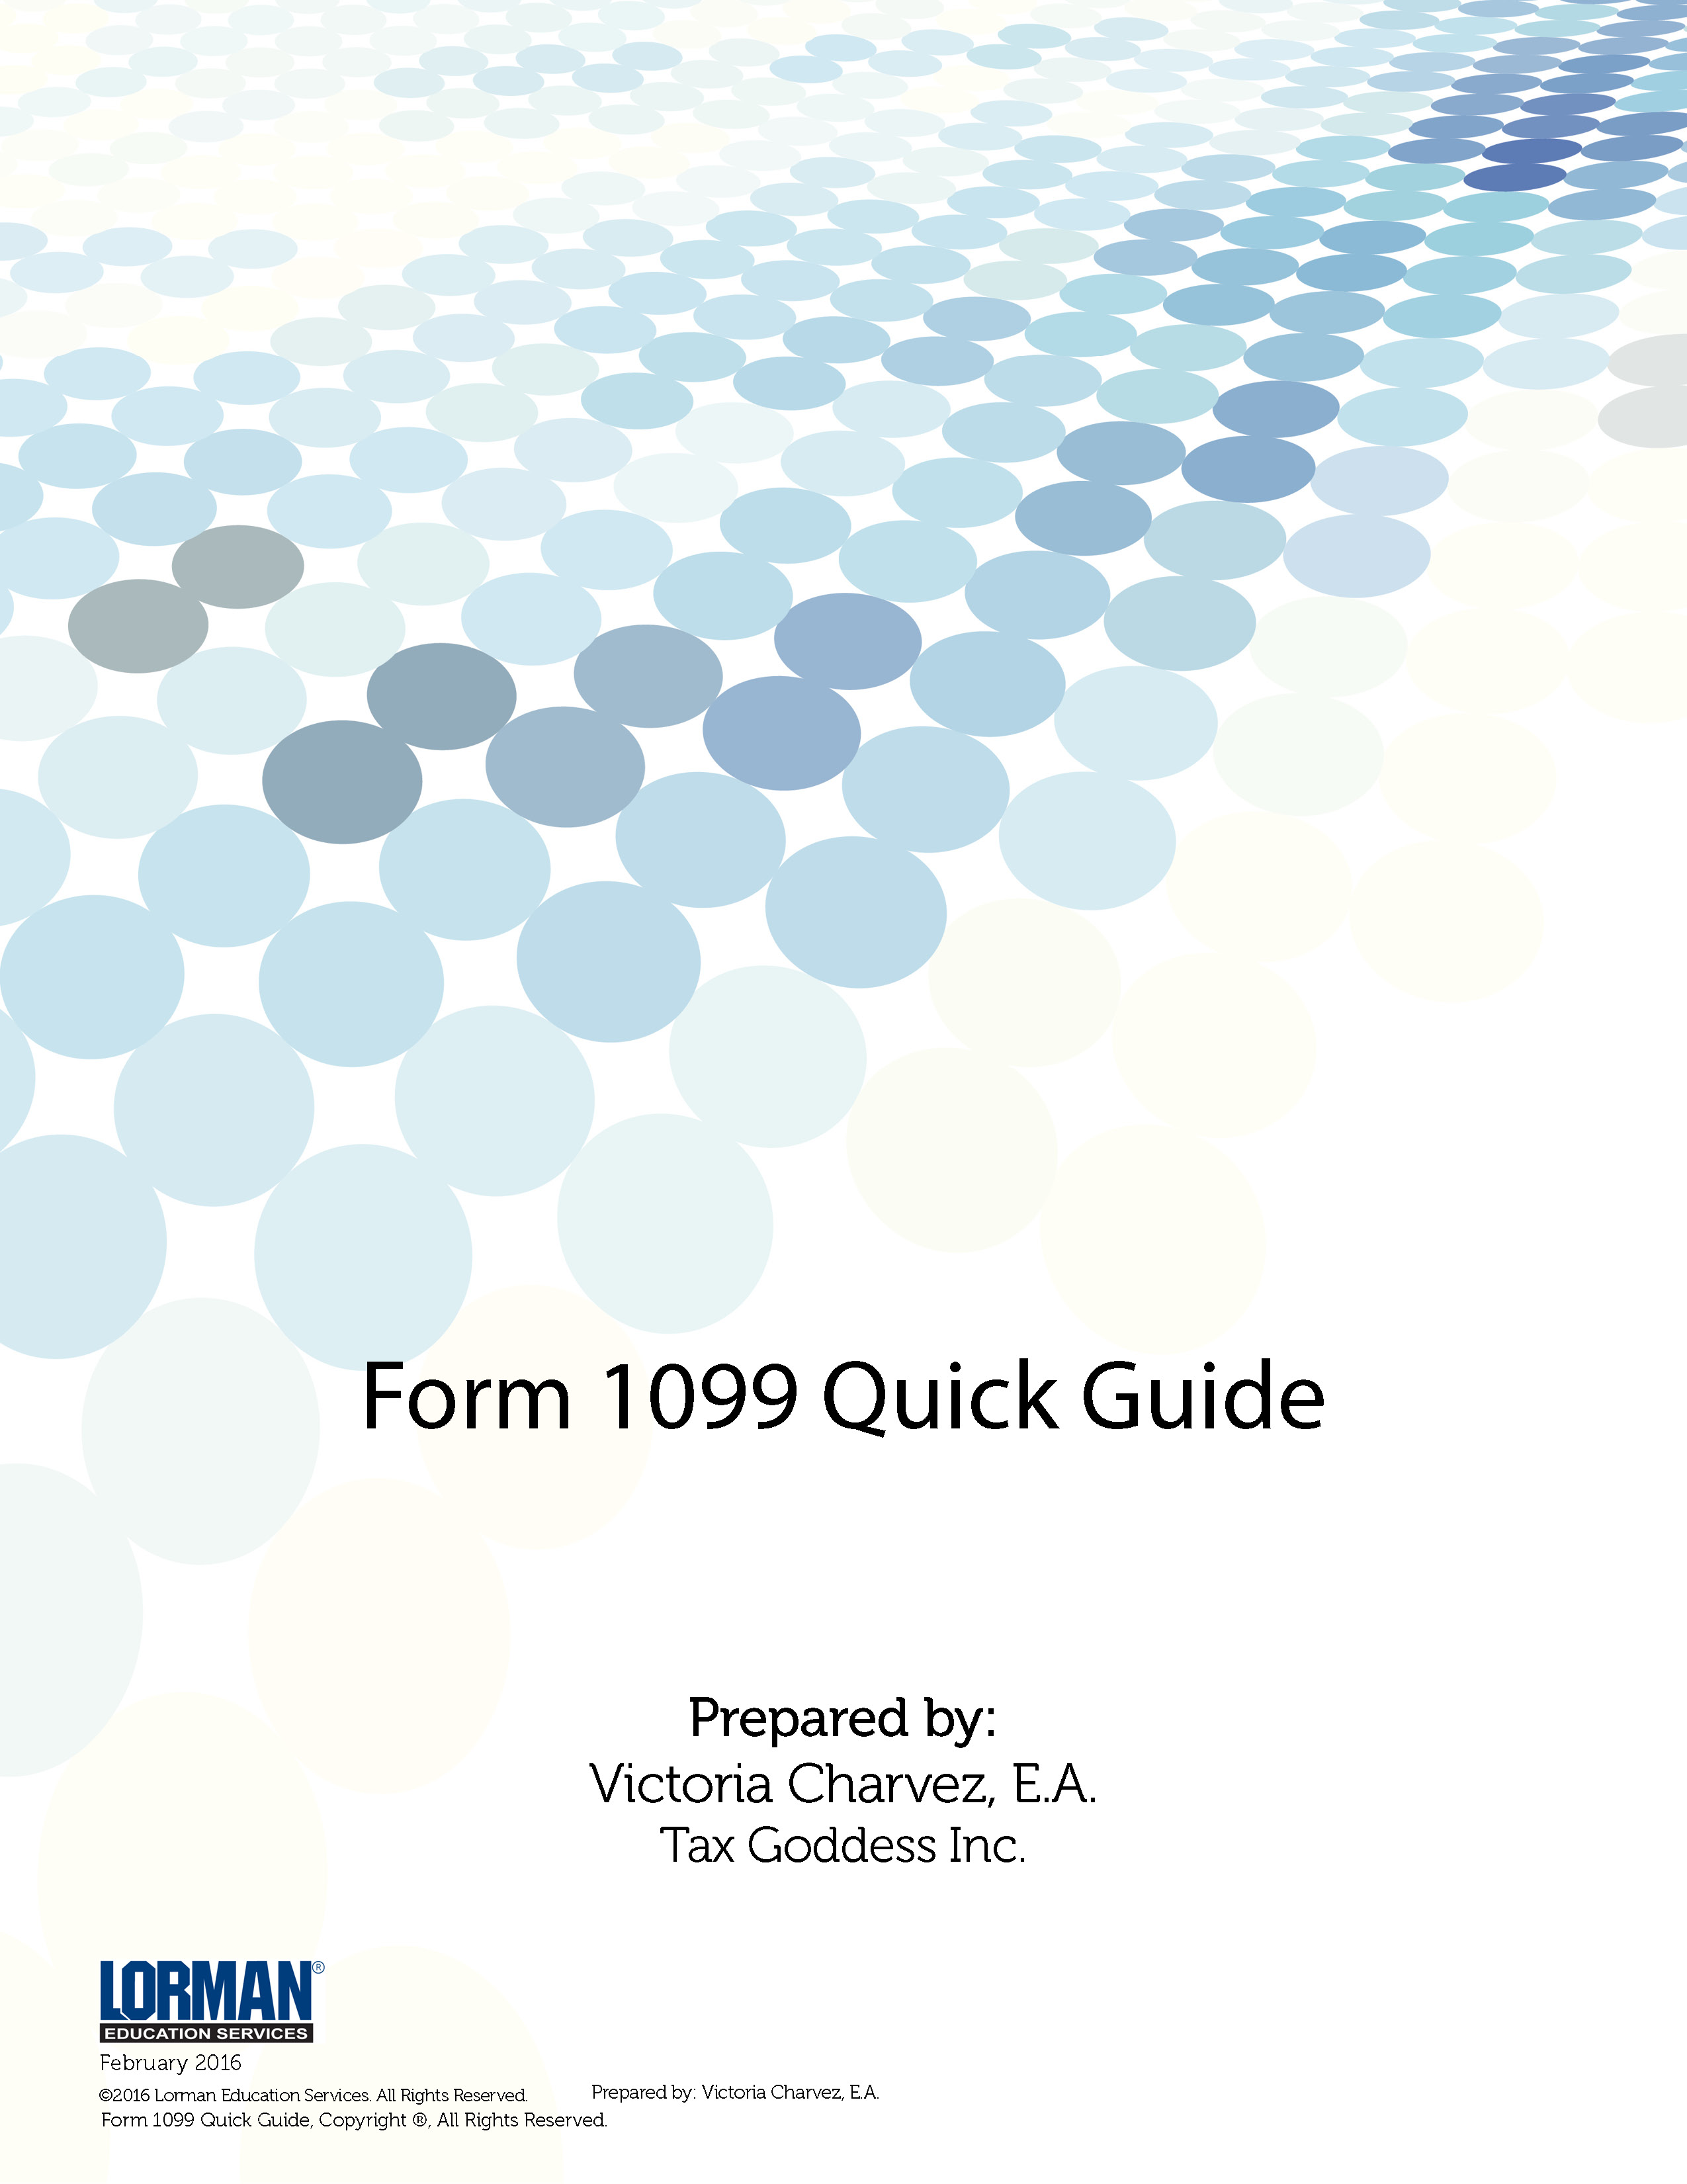 Form 1099 Quick Guide